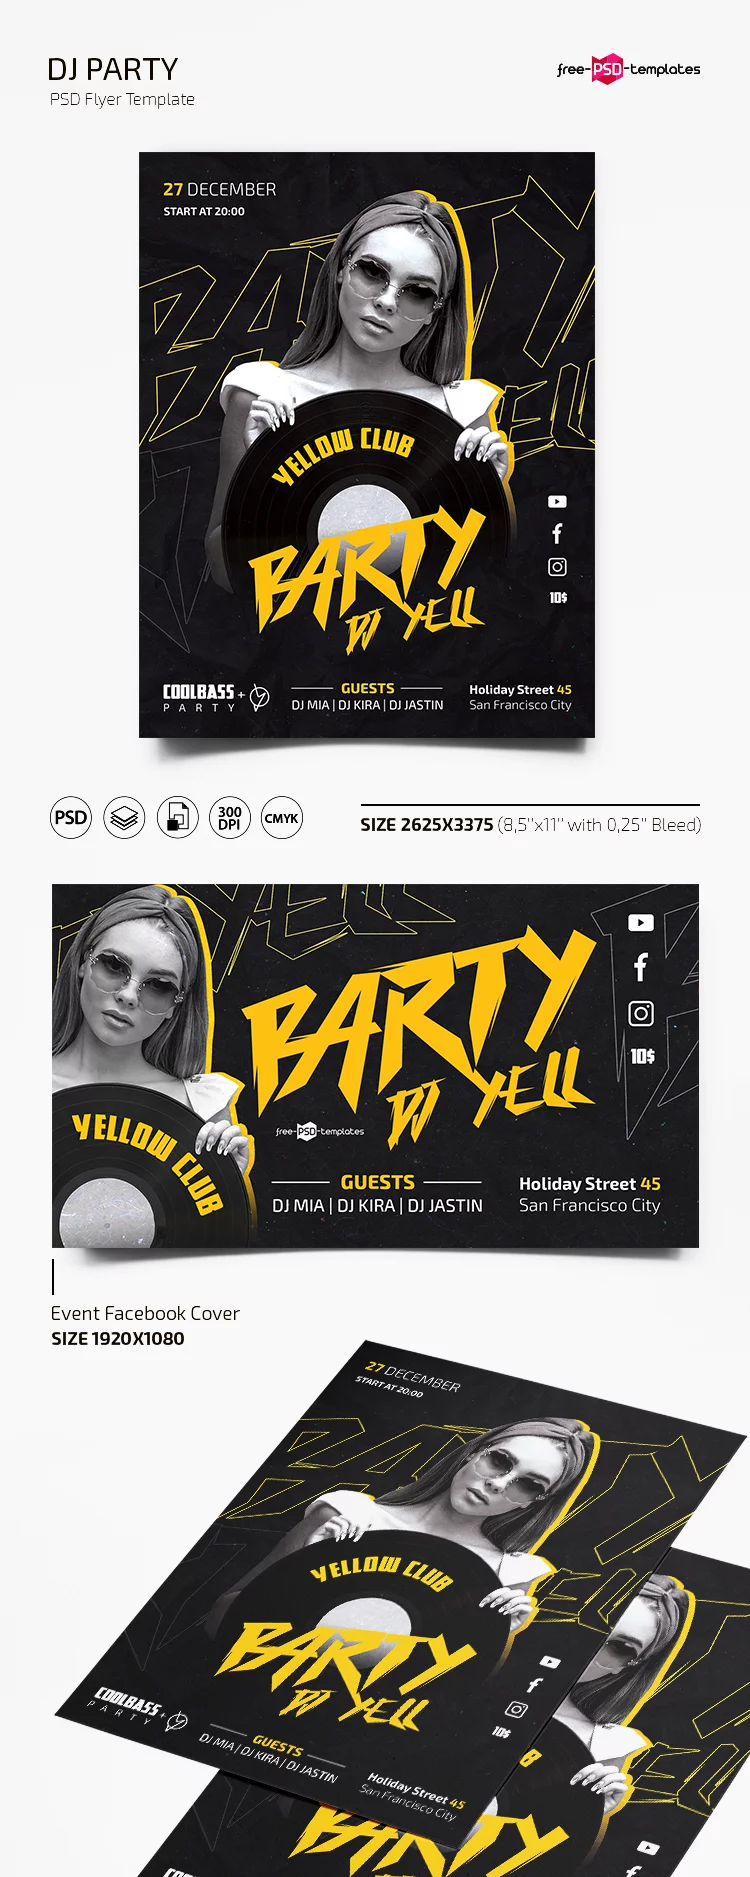 Free Dj Party Flyer Template in PSD